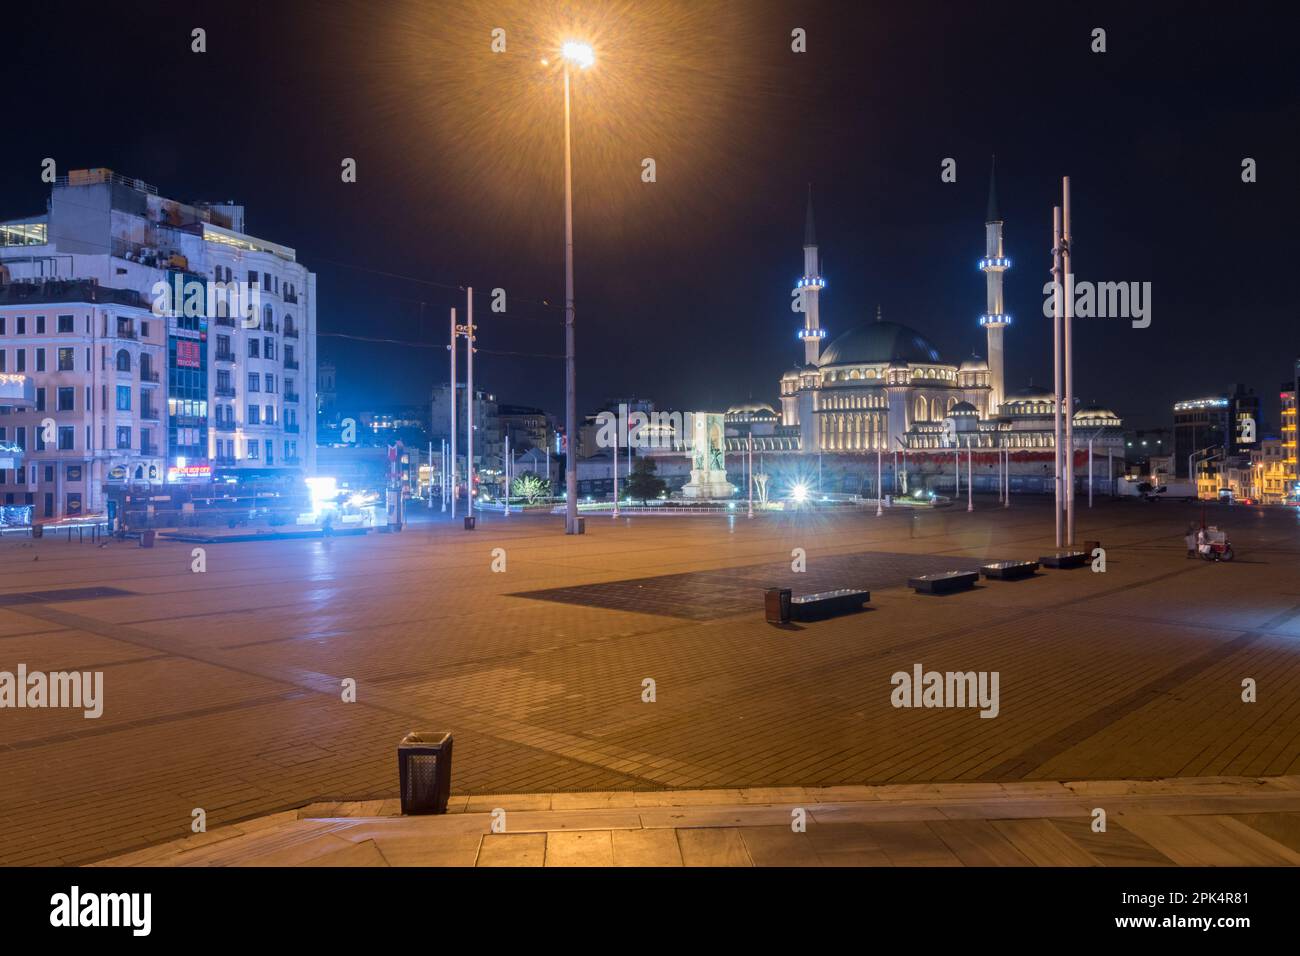 Istanbul, Turkey - December 10, 2022: Night view of Taksim Square (Taksim Meydani), one of the most popular tourist attraction in Istanbul. Stock Photo